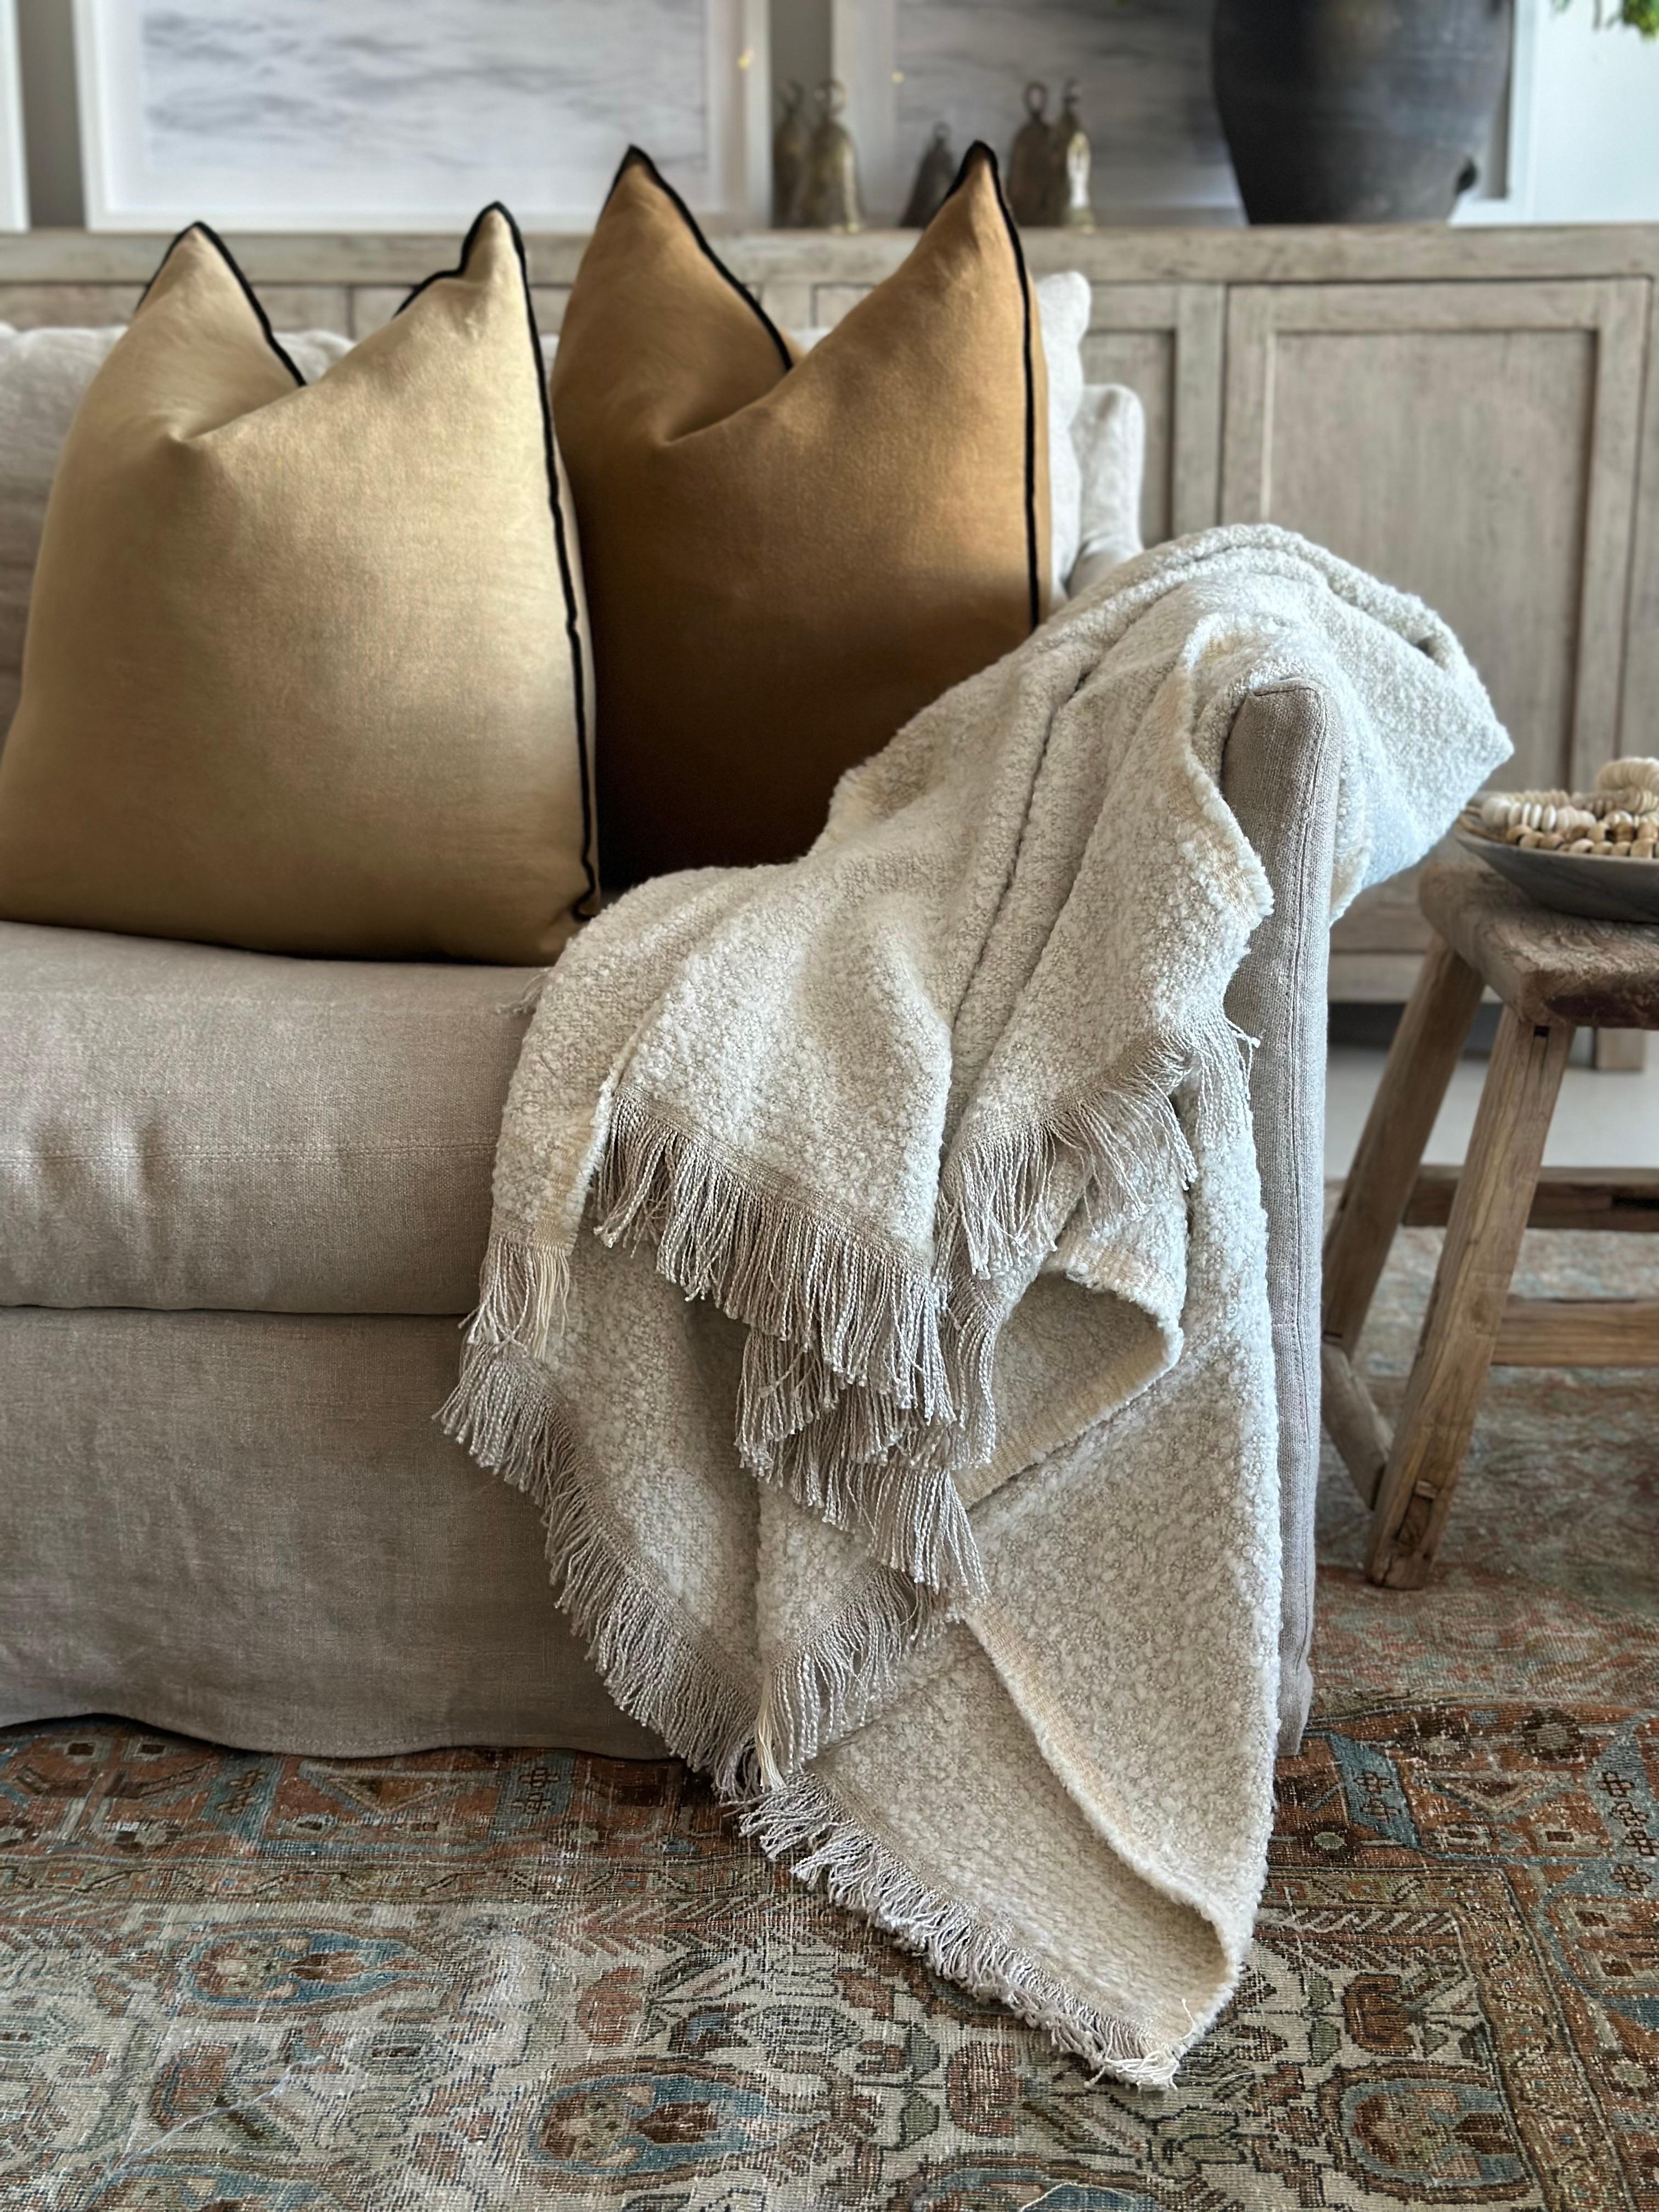 Woven in Belgium using traditional weaving techniques, Bloom Home Inc throw features a combination of smooth Belgian Linen and woolly Alpaca. This blanket combines a fluffy boucle wool with a silky soft viscose/linen.

Color: Natural &